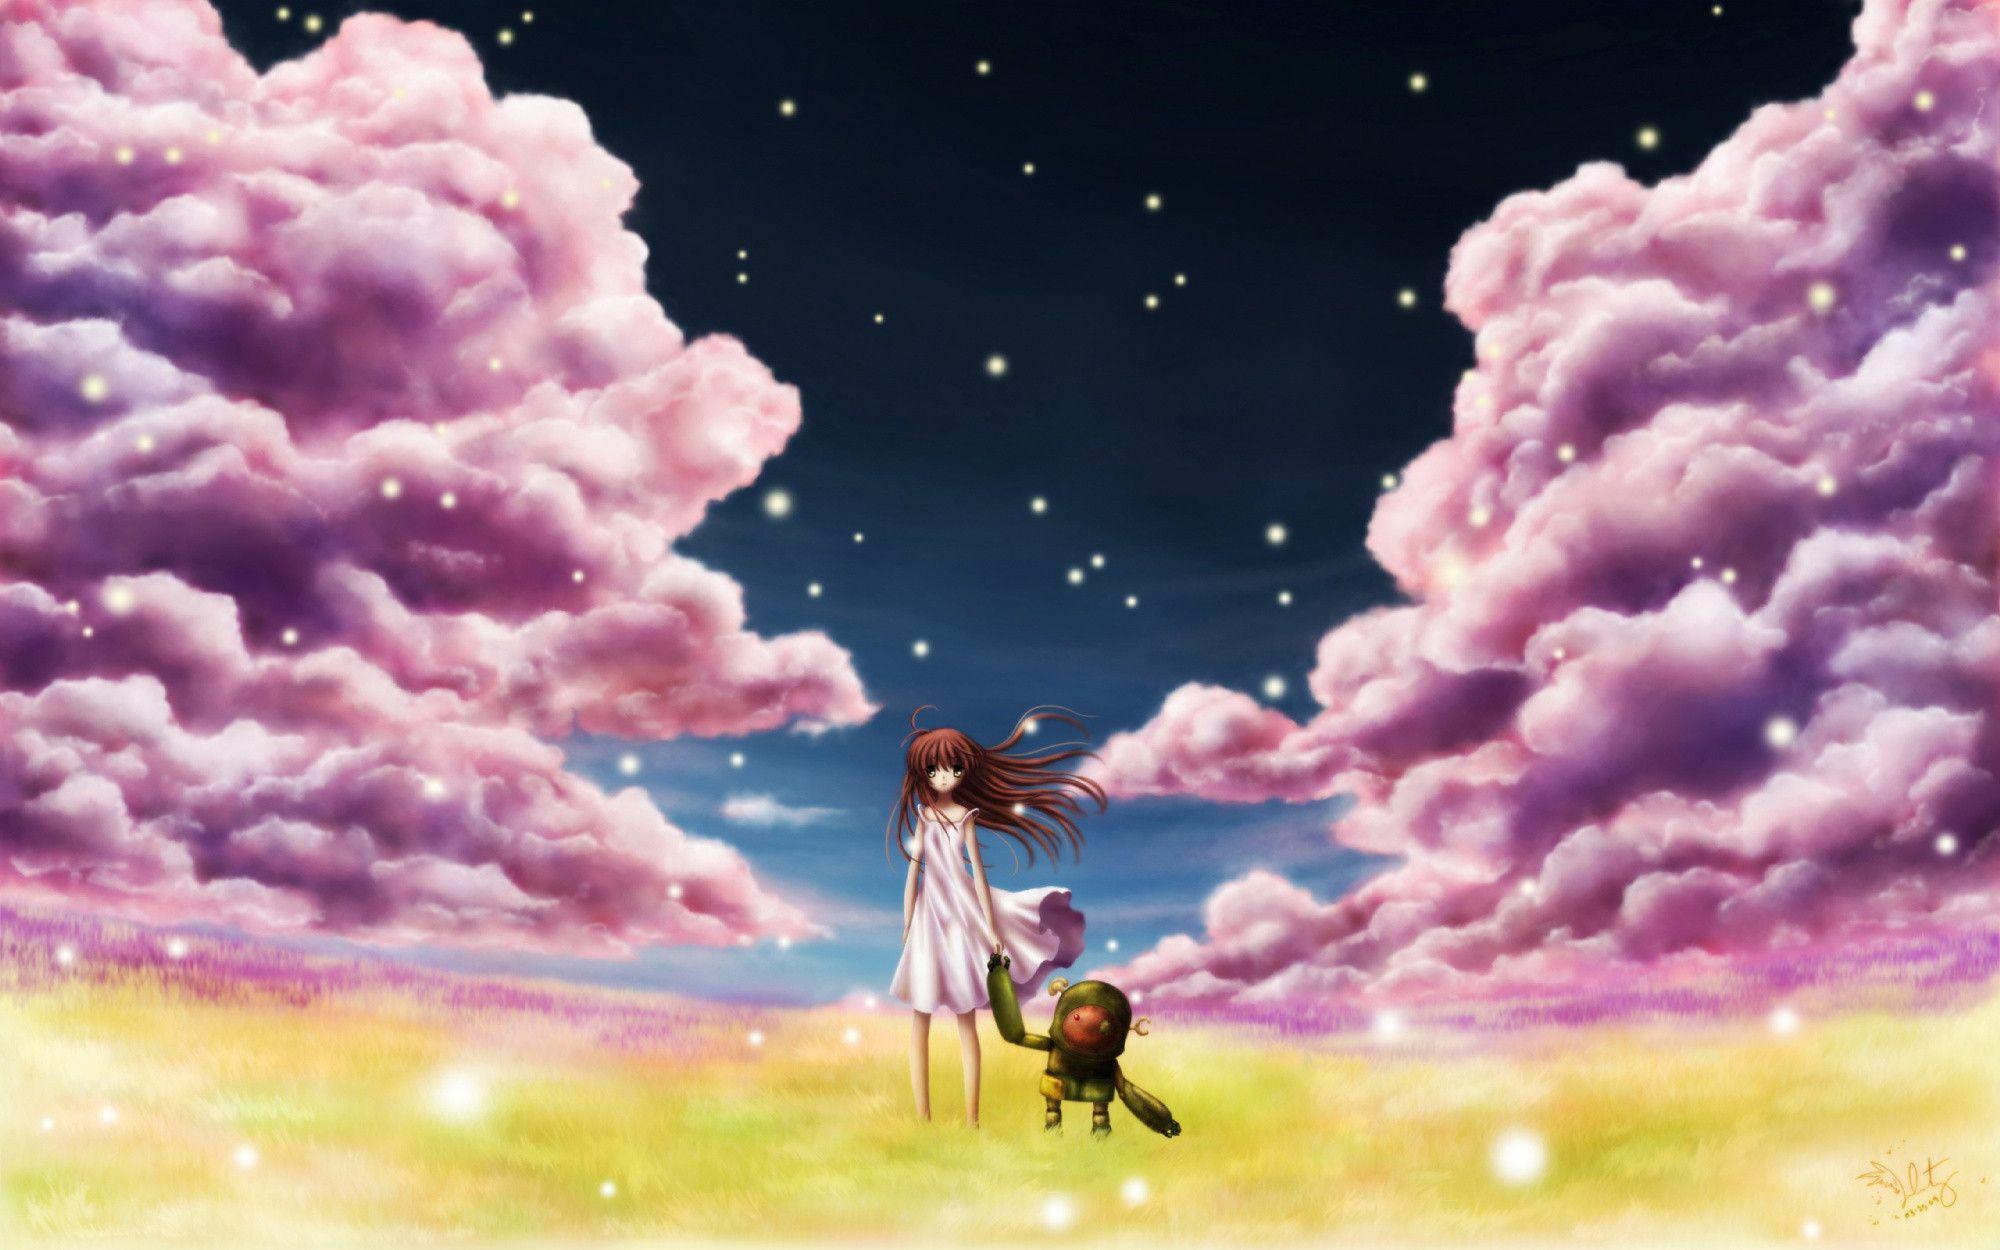 Clannad Art - ID: 78608  Clannad, Clannad after story, Anime images